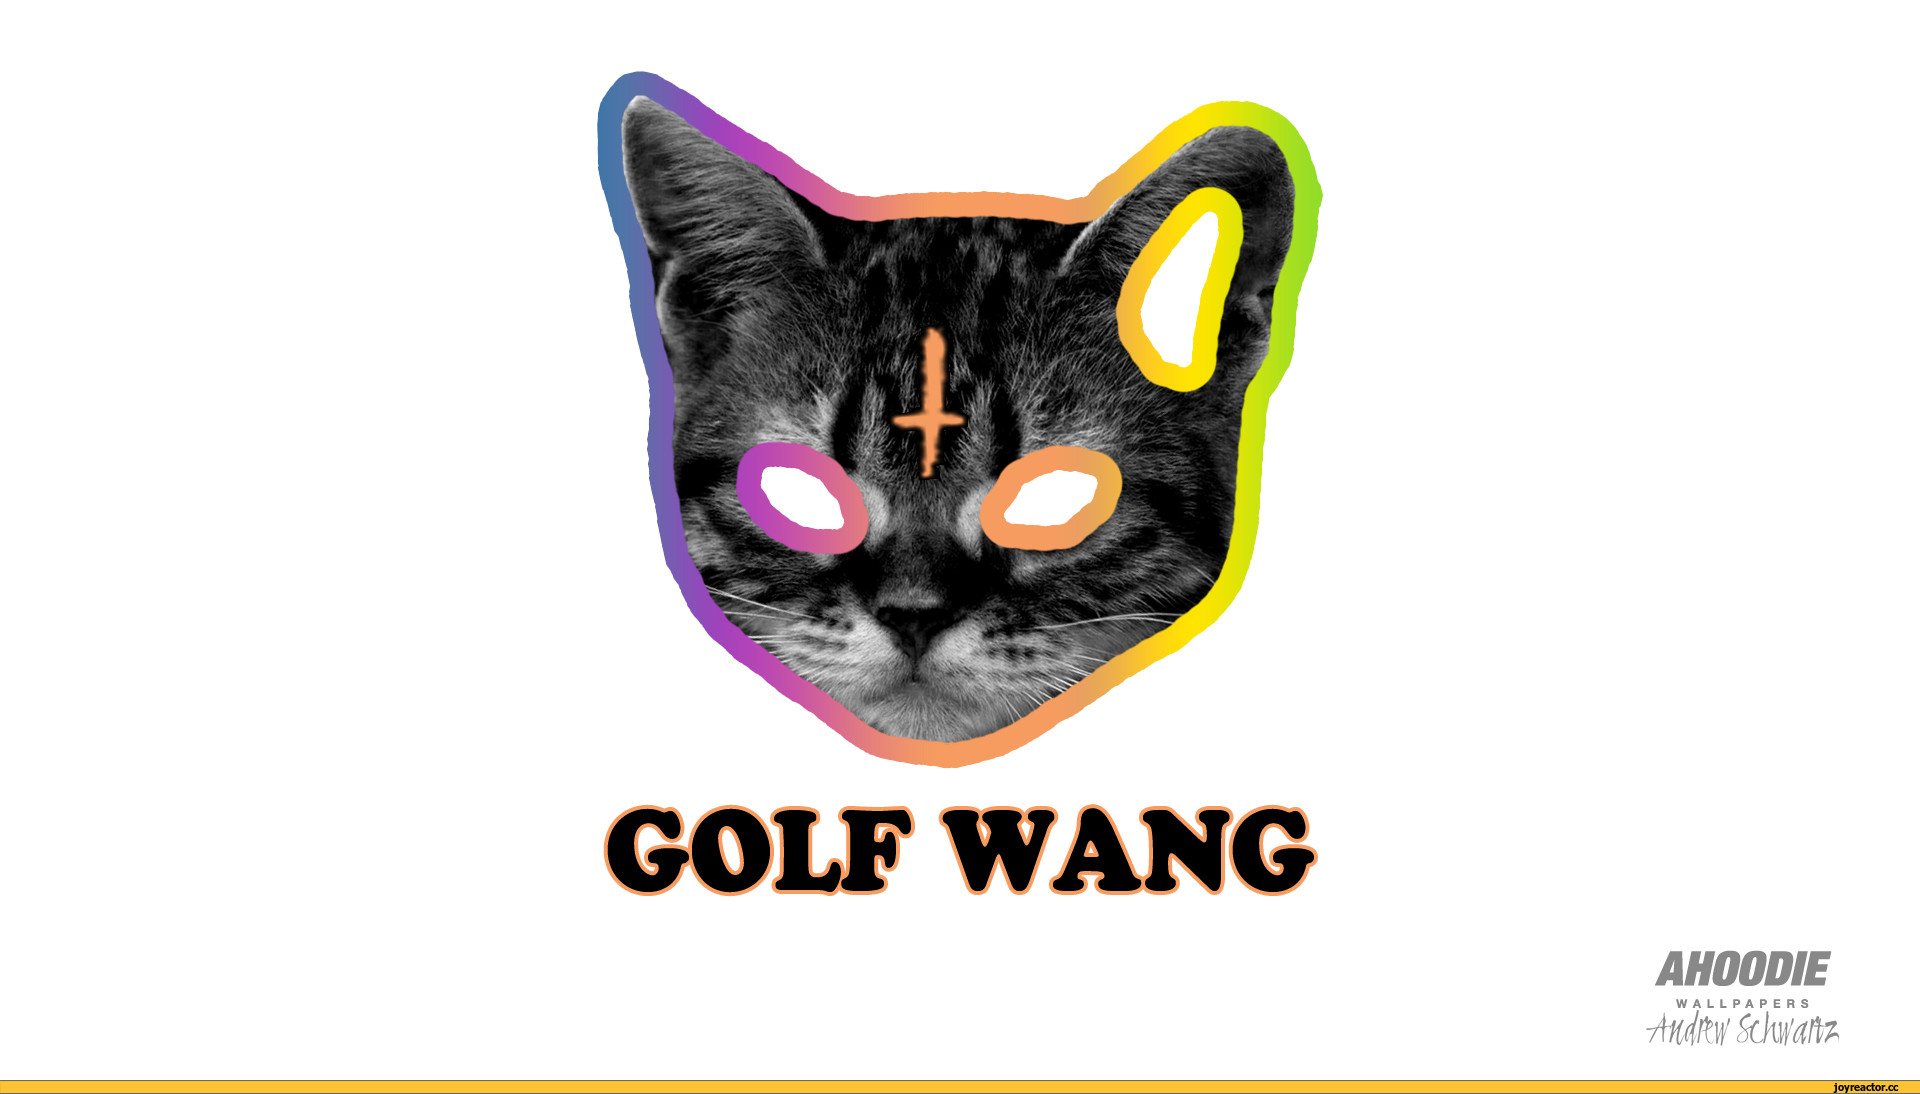 Wallpapers Golf Wang Cats Related Pictures Odd Future Hd